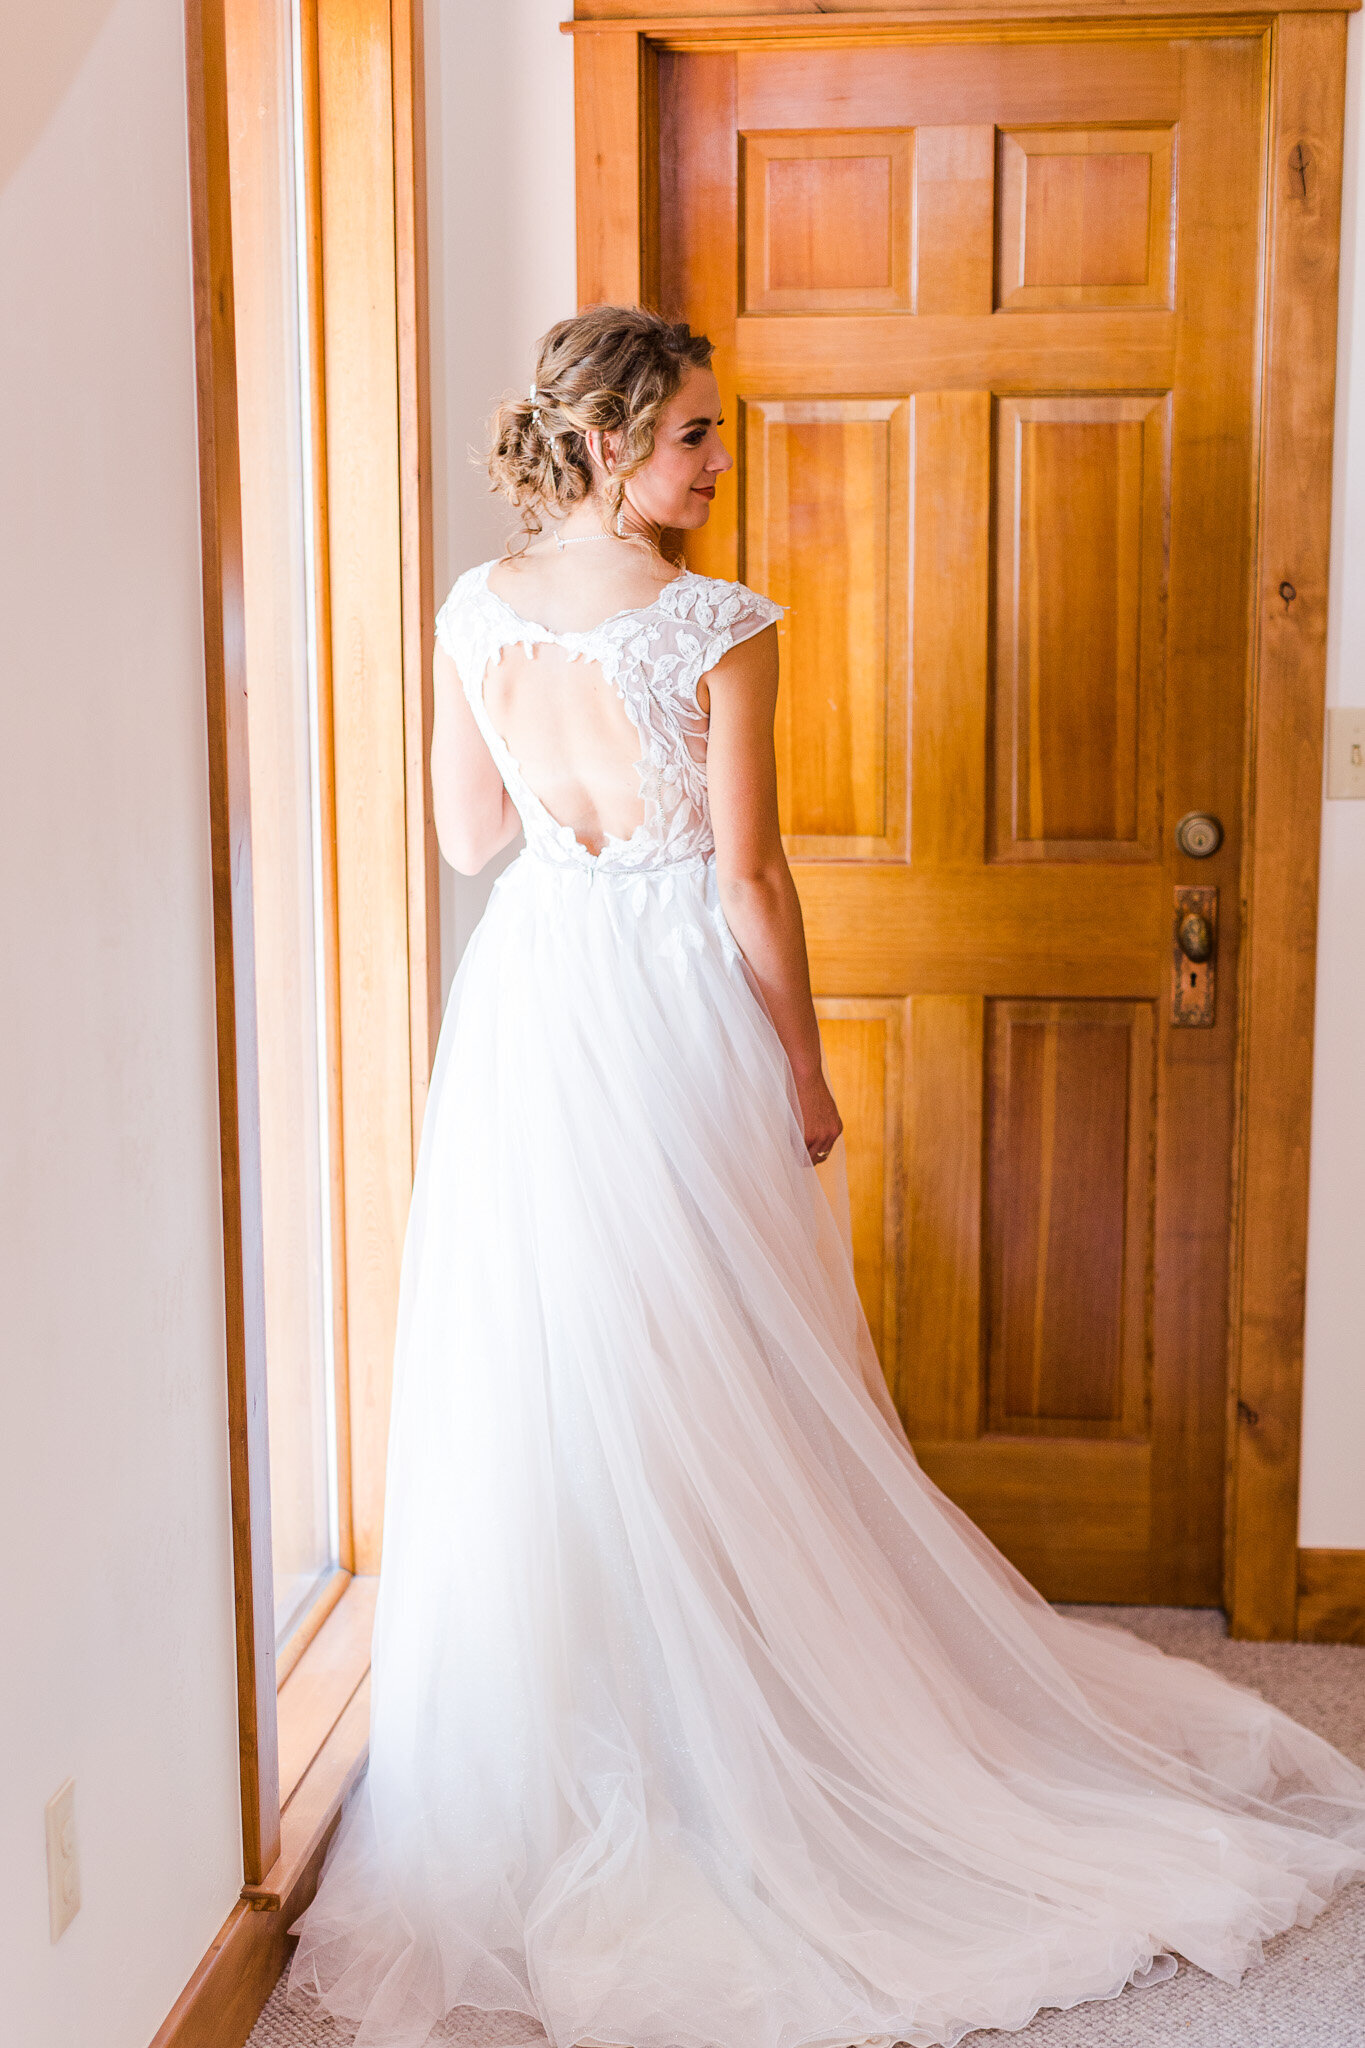 Full length bride in gown